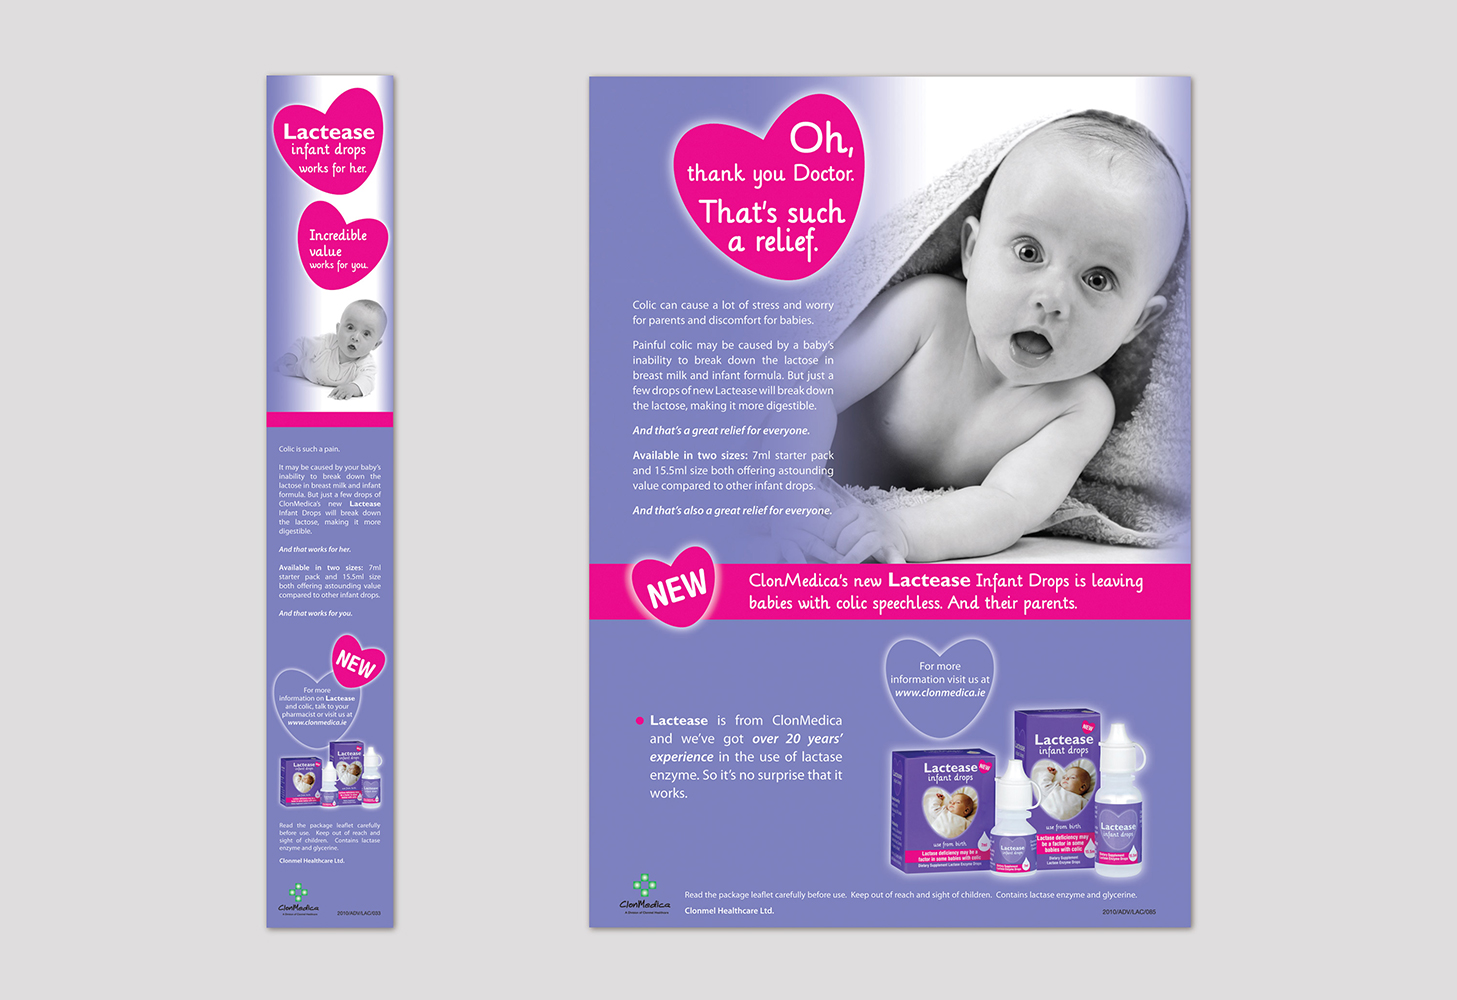 Lactease Adverts, Leaflets, Web Banners, POS, Promotional Materials